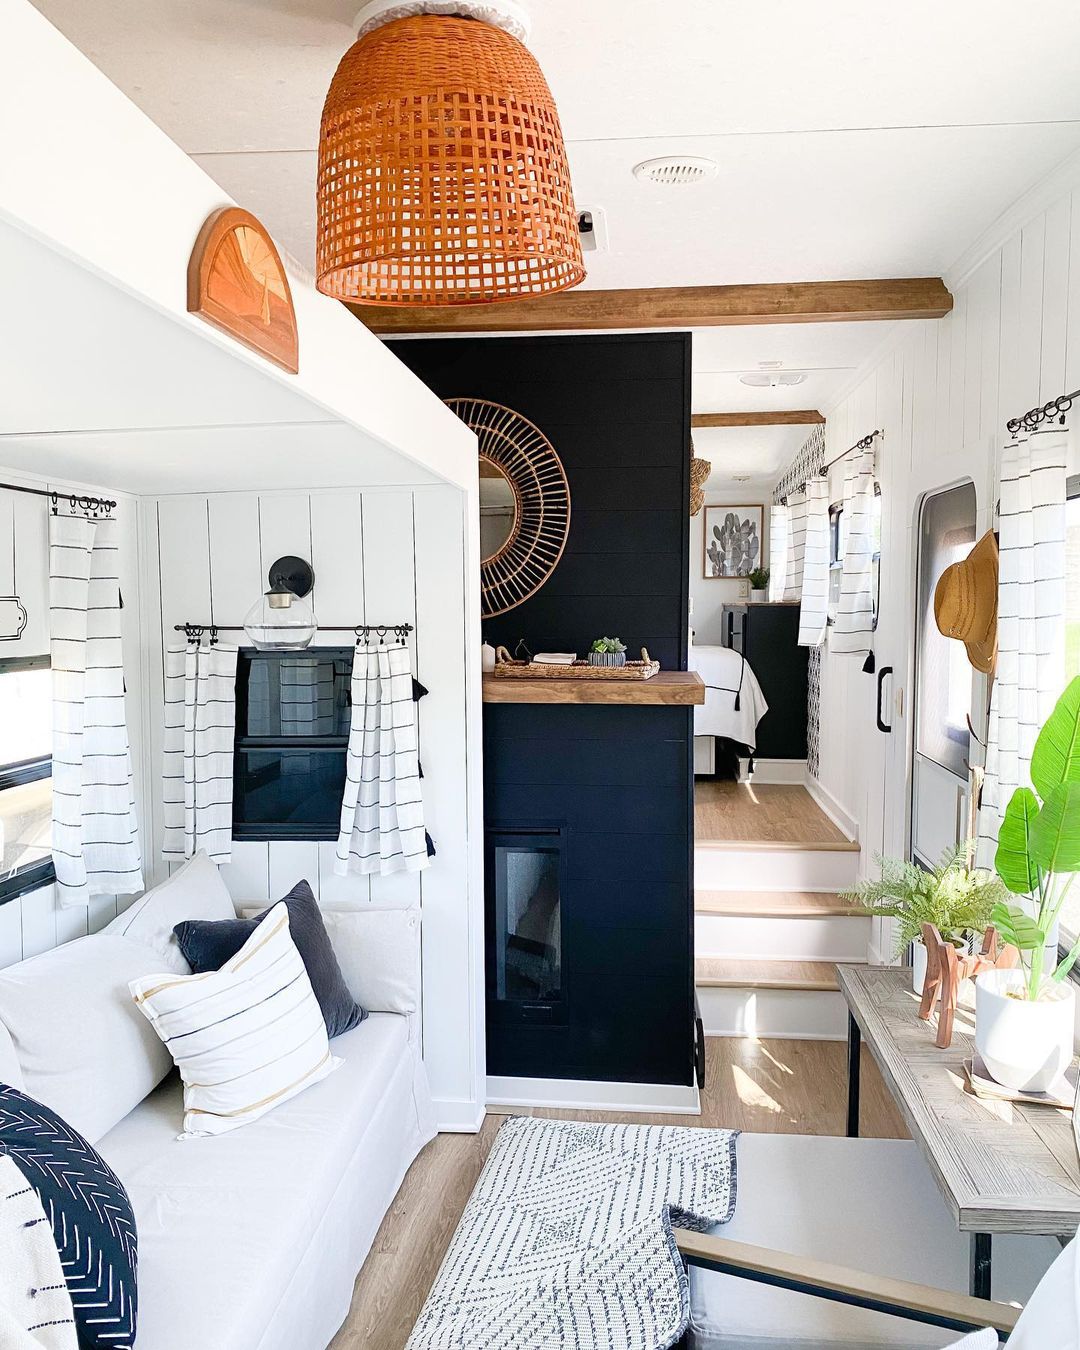 RV interior featuring white walls with a navy accent wall, light pillows and furniture. Photo by Instagram user @wisco_flip.